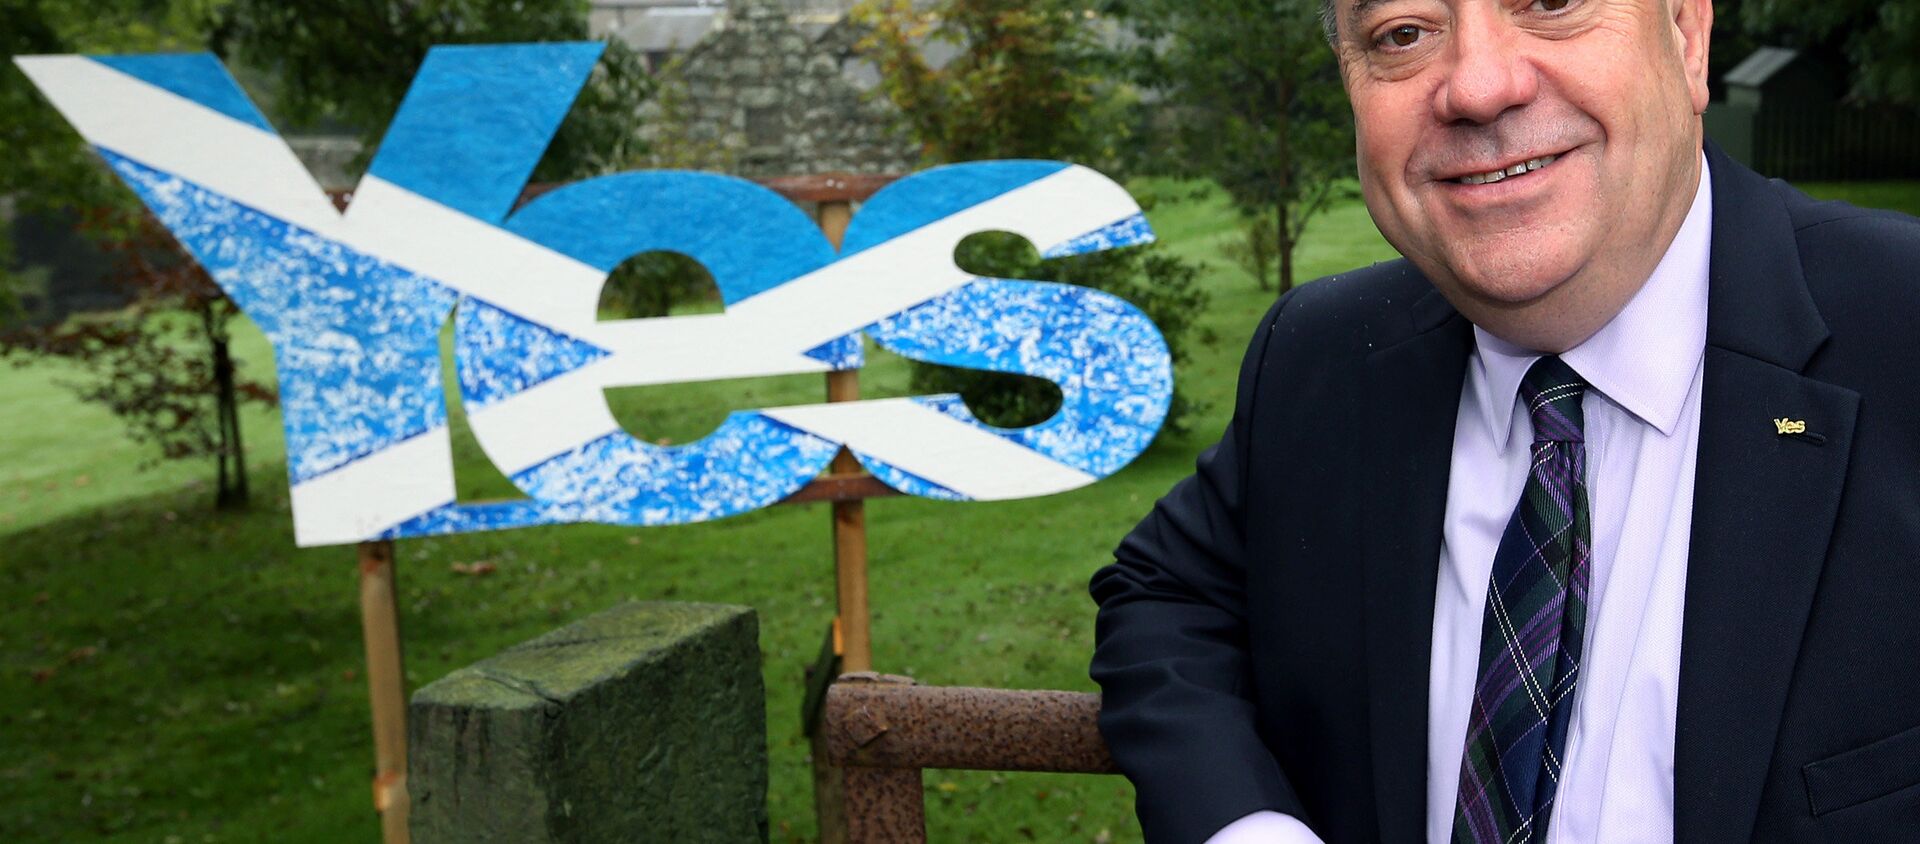 Scotland's then First Minister Alex Salmond poses for photographs outside his home in Strichen, Scotland, Thursday, Sept. 18, 2014.  - Sputnik International, 1920, 26.02.2021